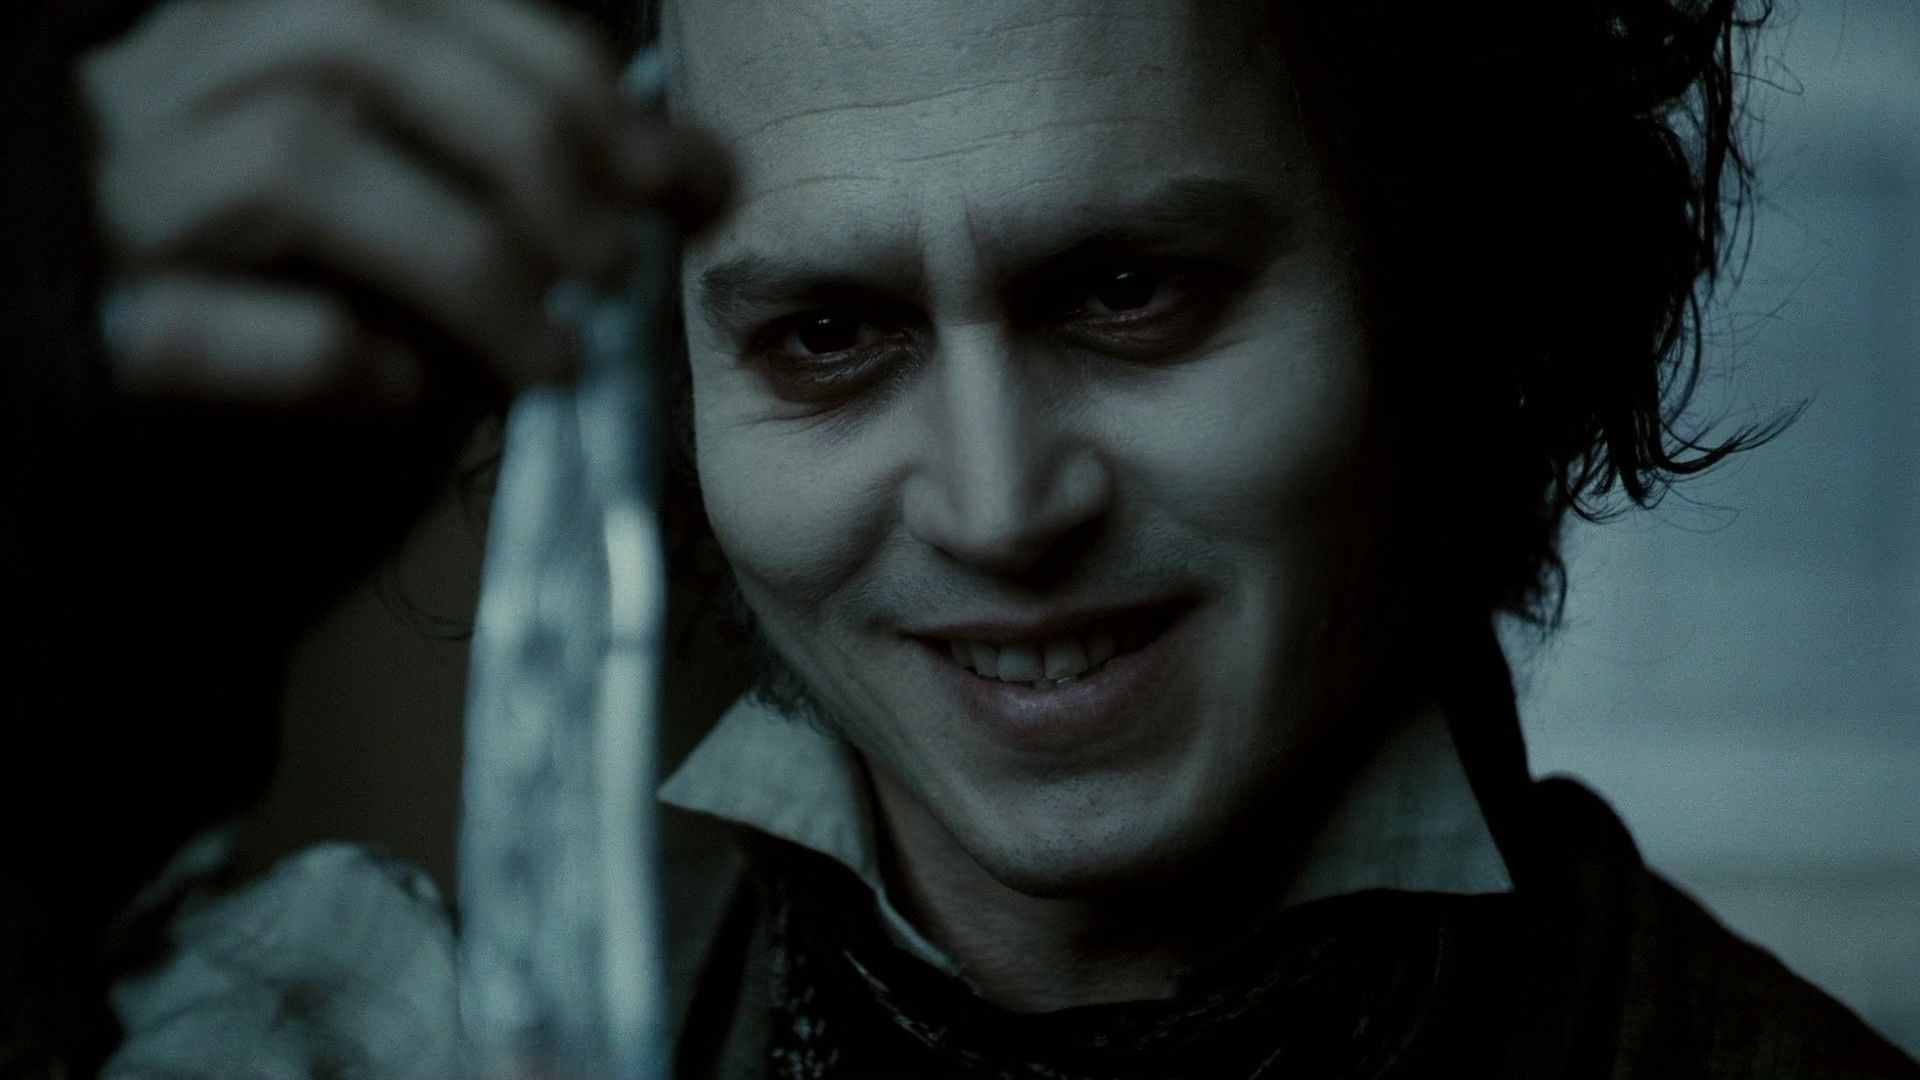 Funny faces clubs, Sweeney Todd images, Funny st faces, Tim Burton films, 1920x1080 Full HD Desktop